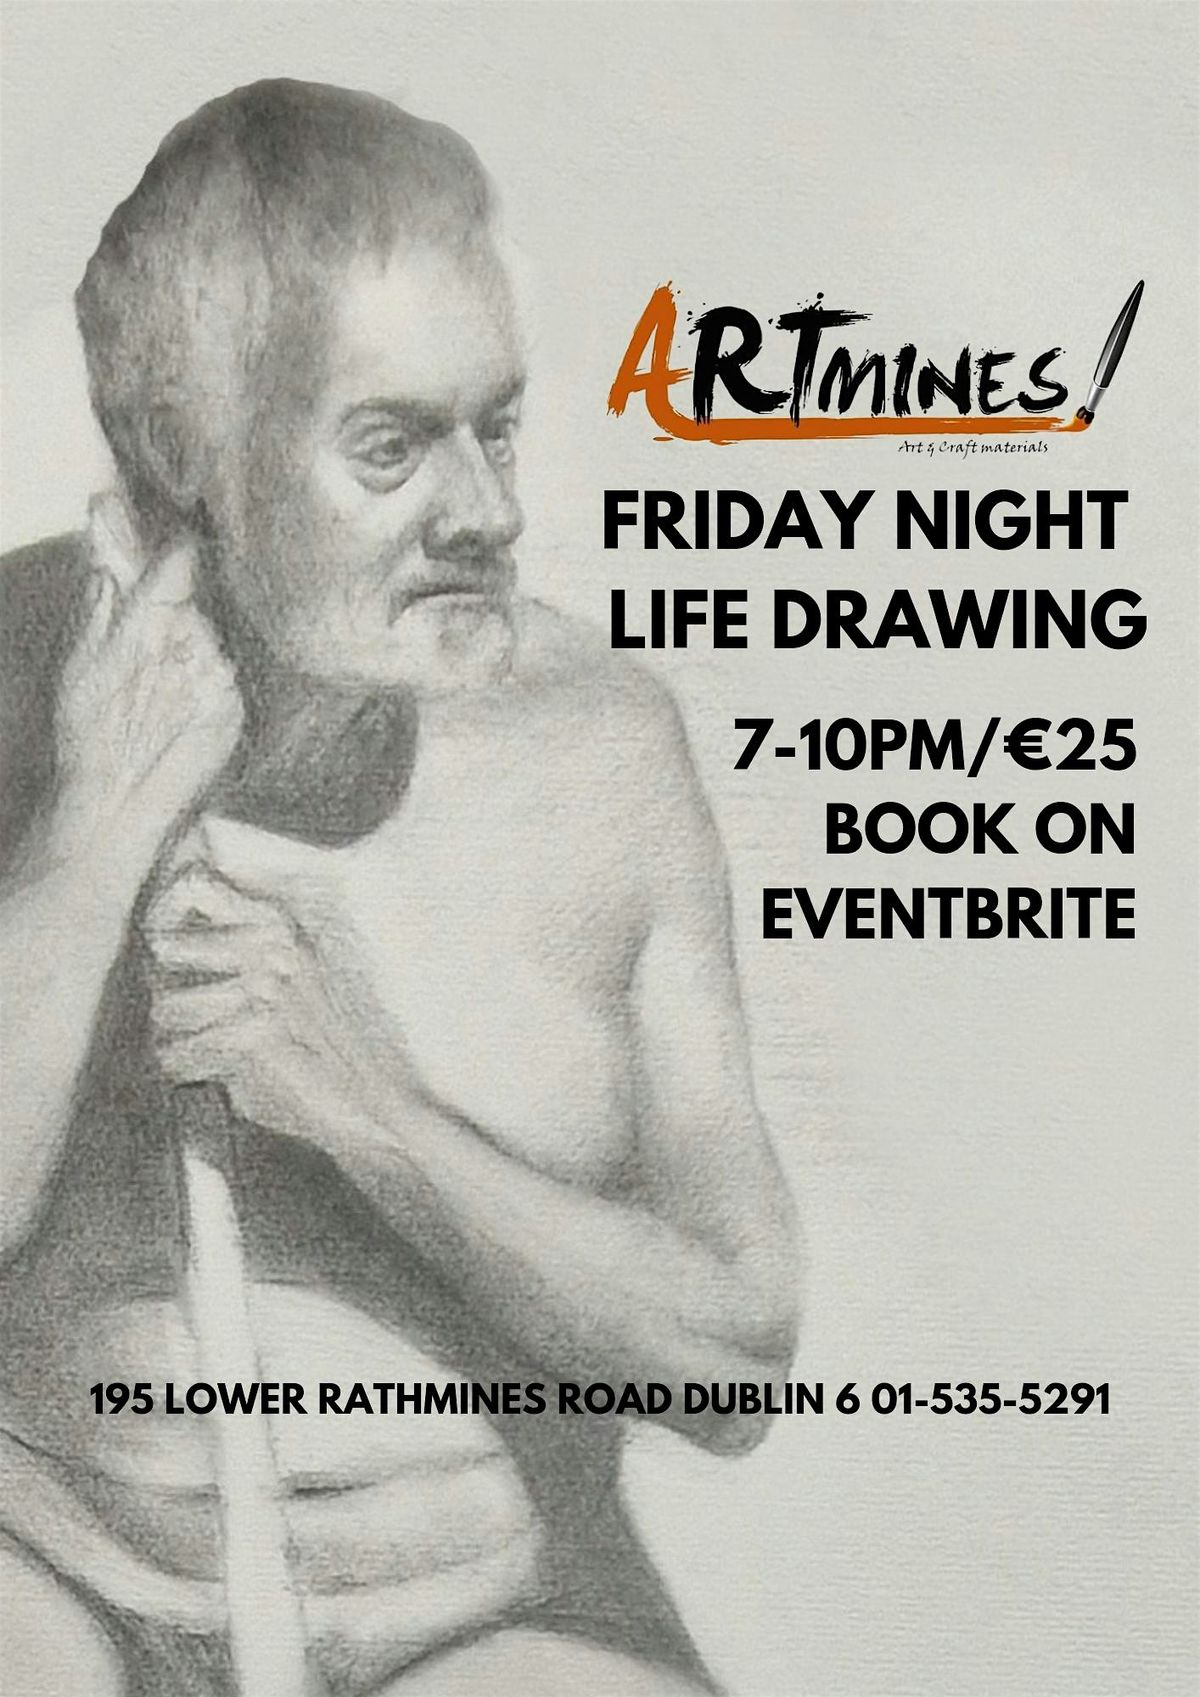 Artmines life drawing